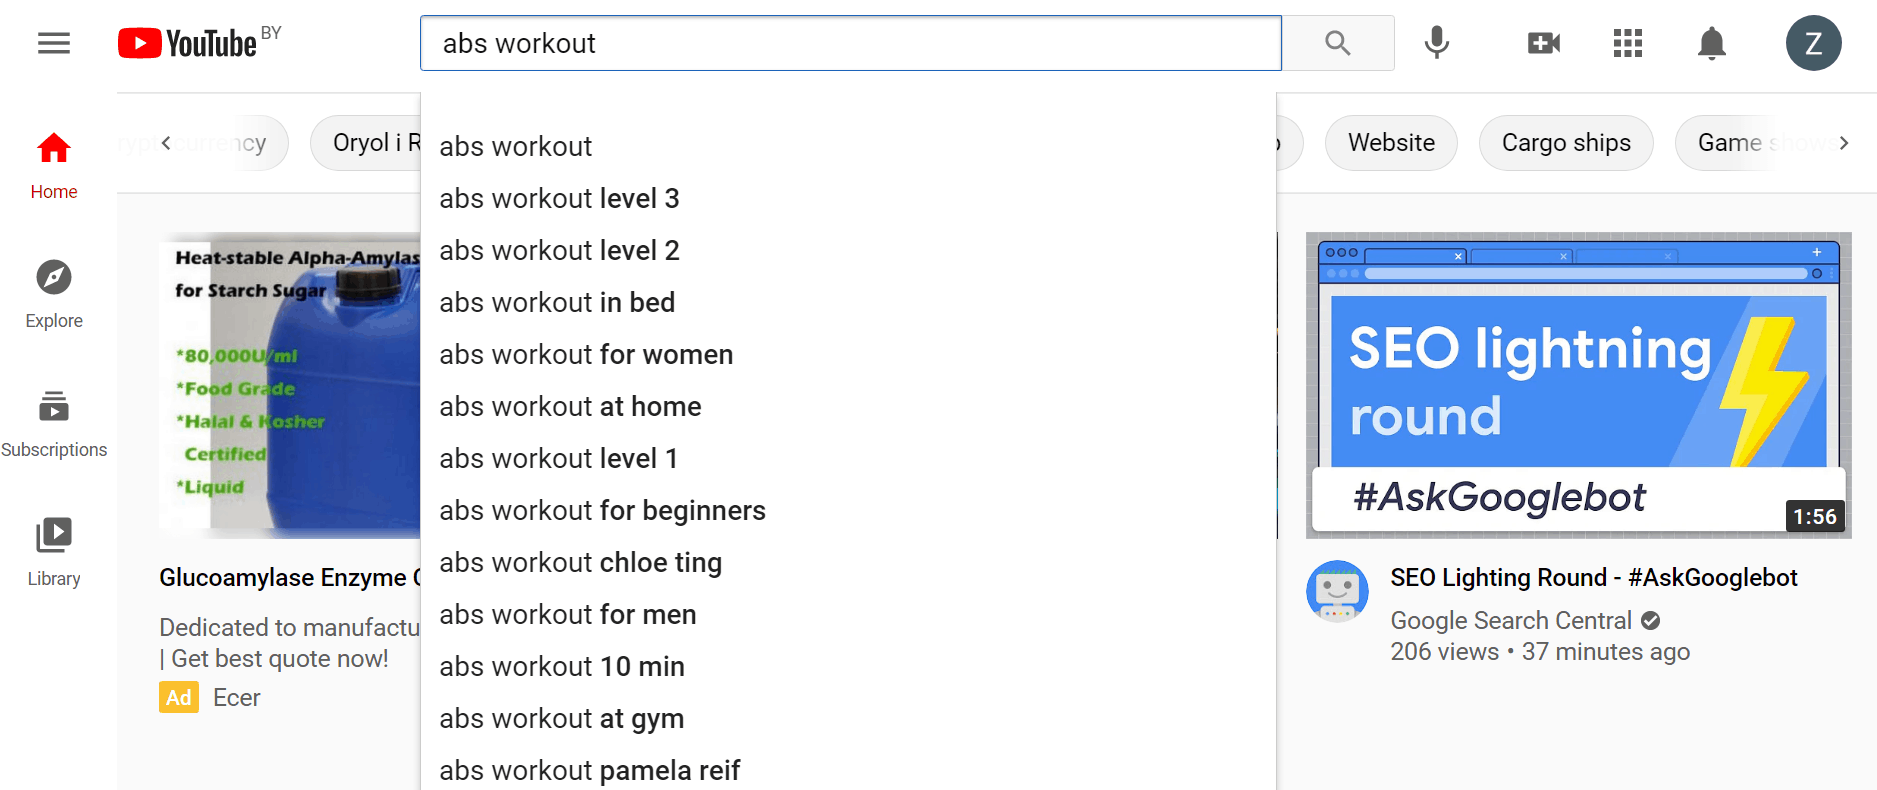 YouTube Search Suggest